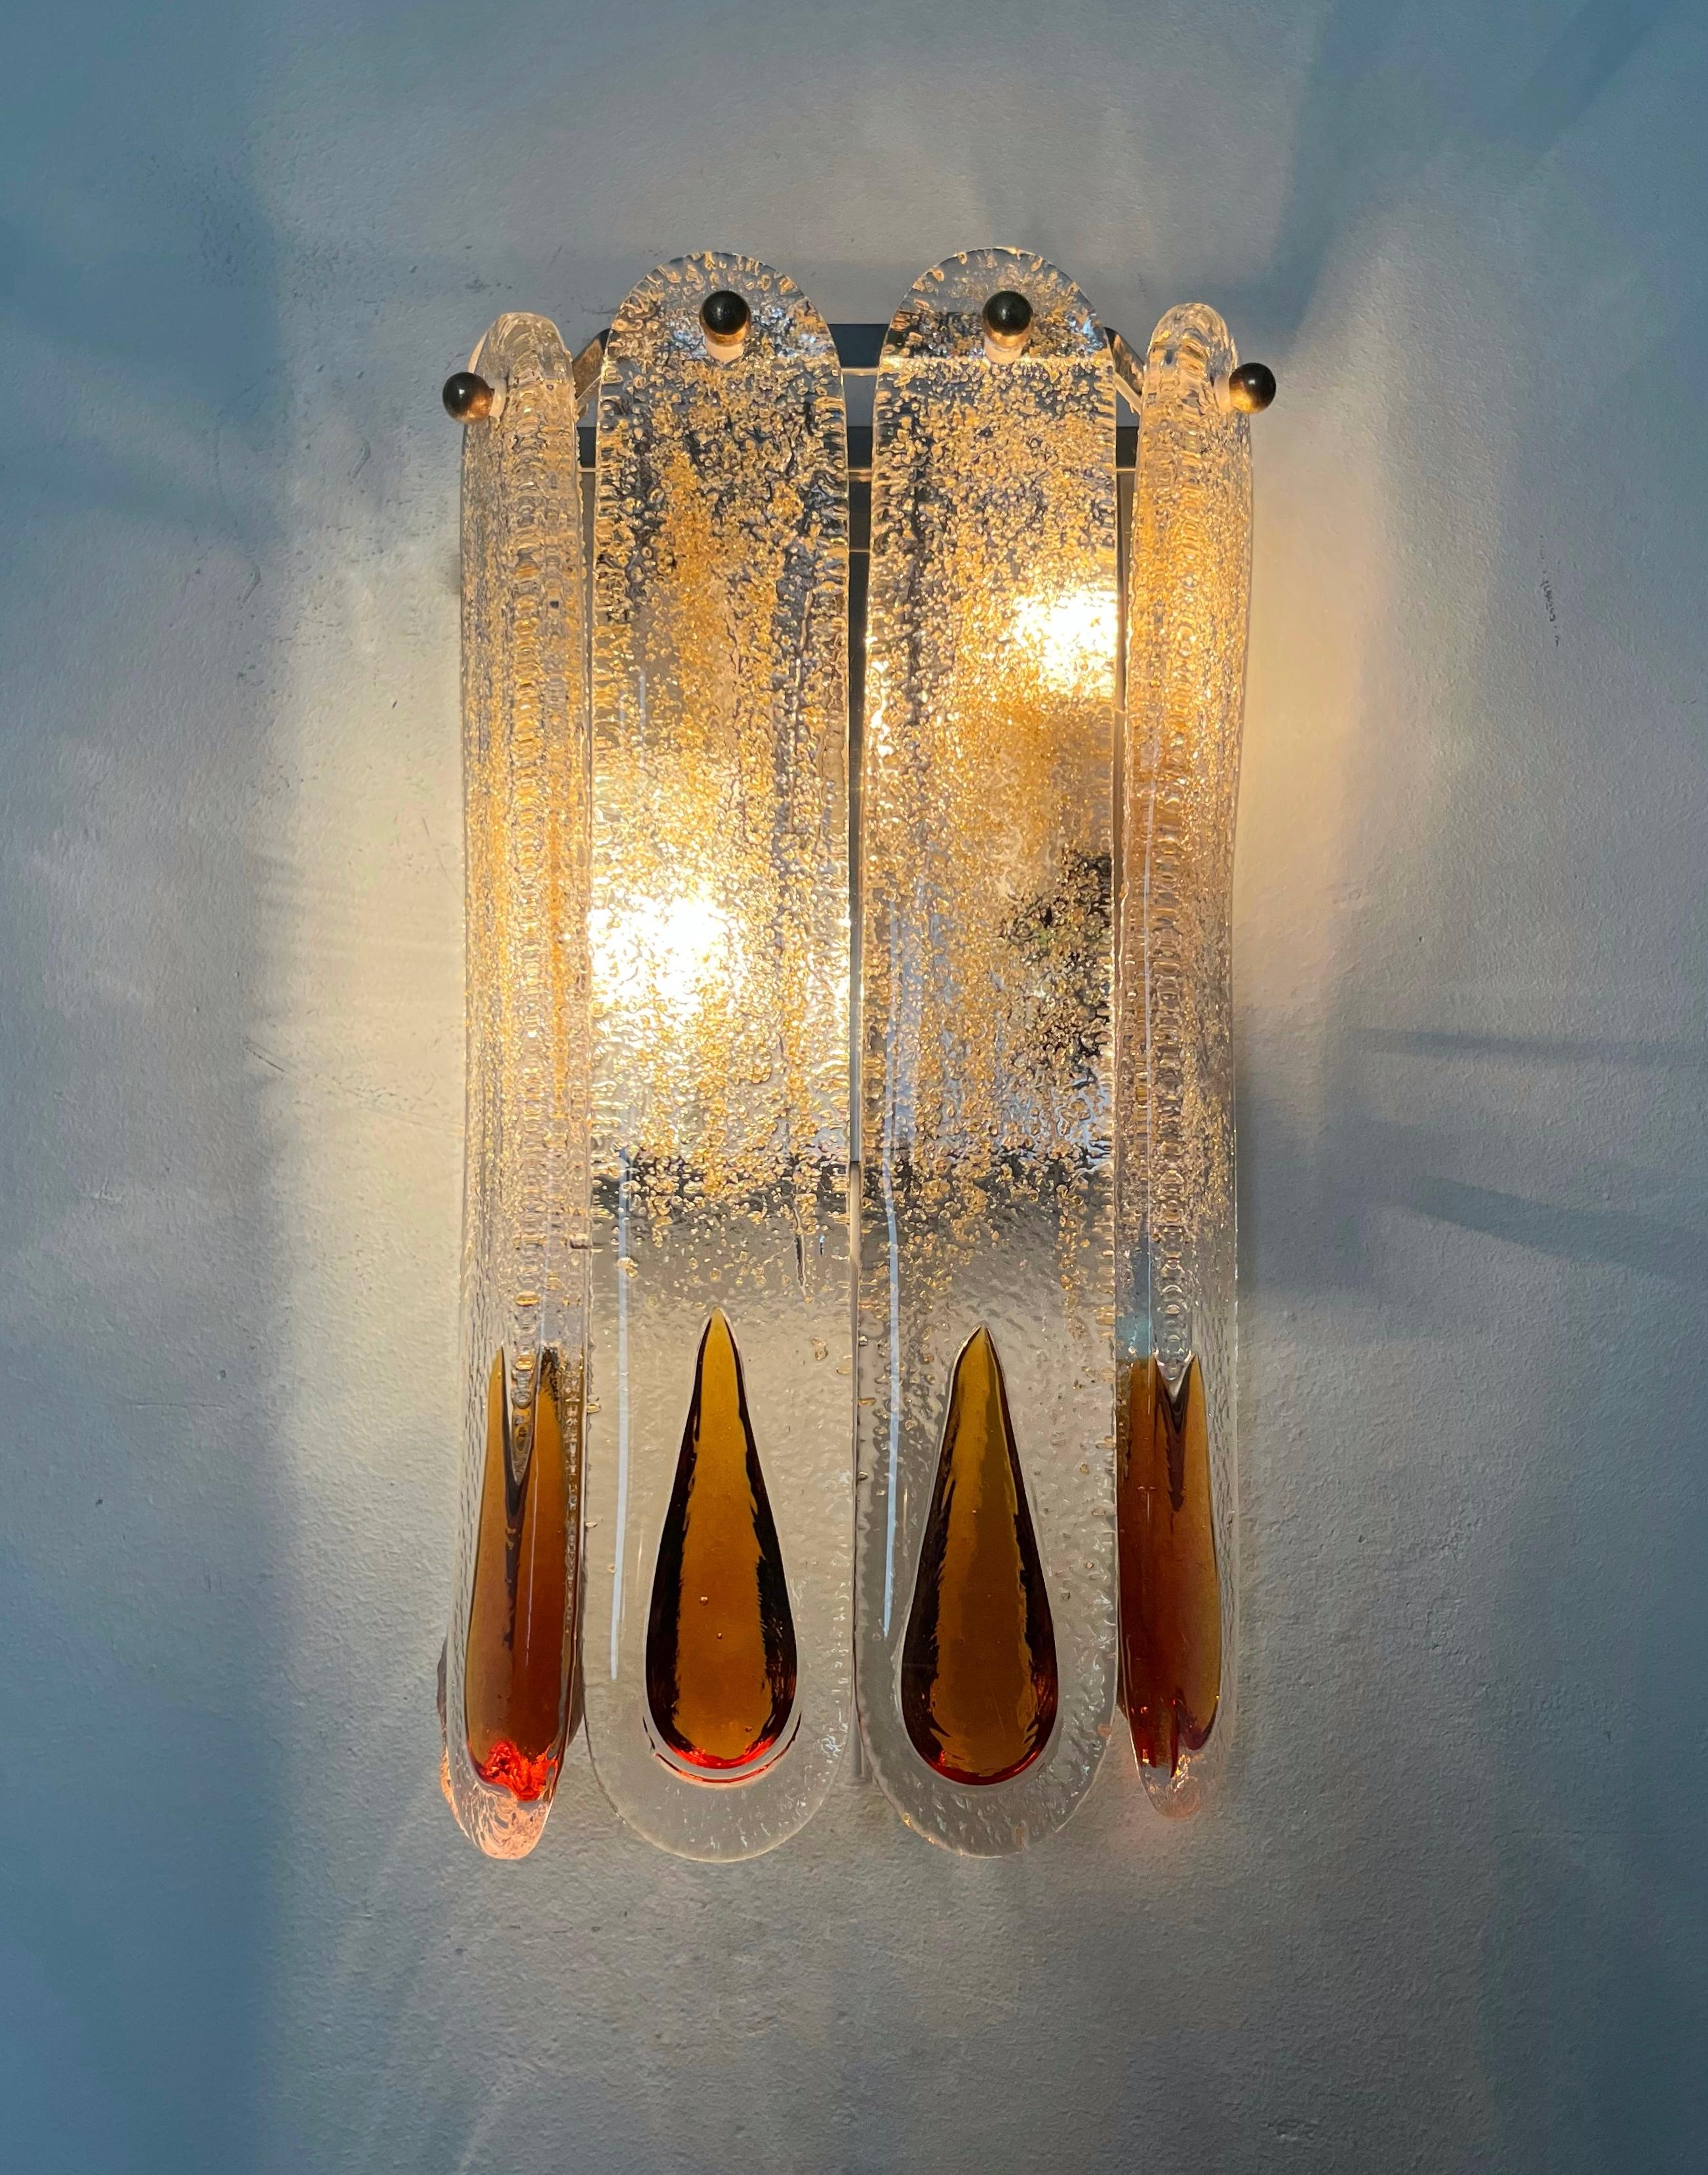 Pair of Midcentury Italian Amber Murano Wall Sconces by Mazzega, 1970s For Sale 3